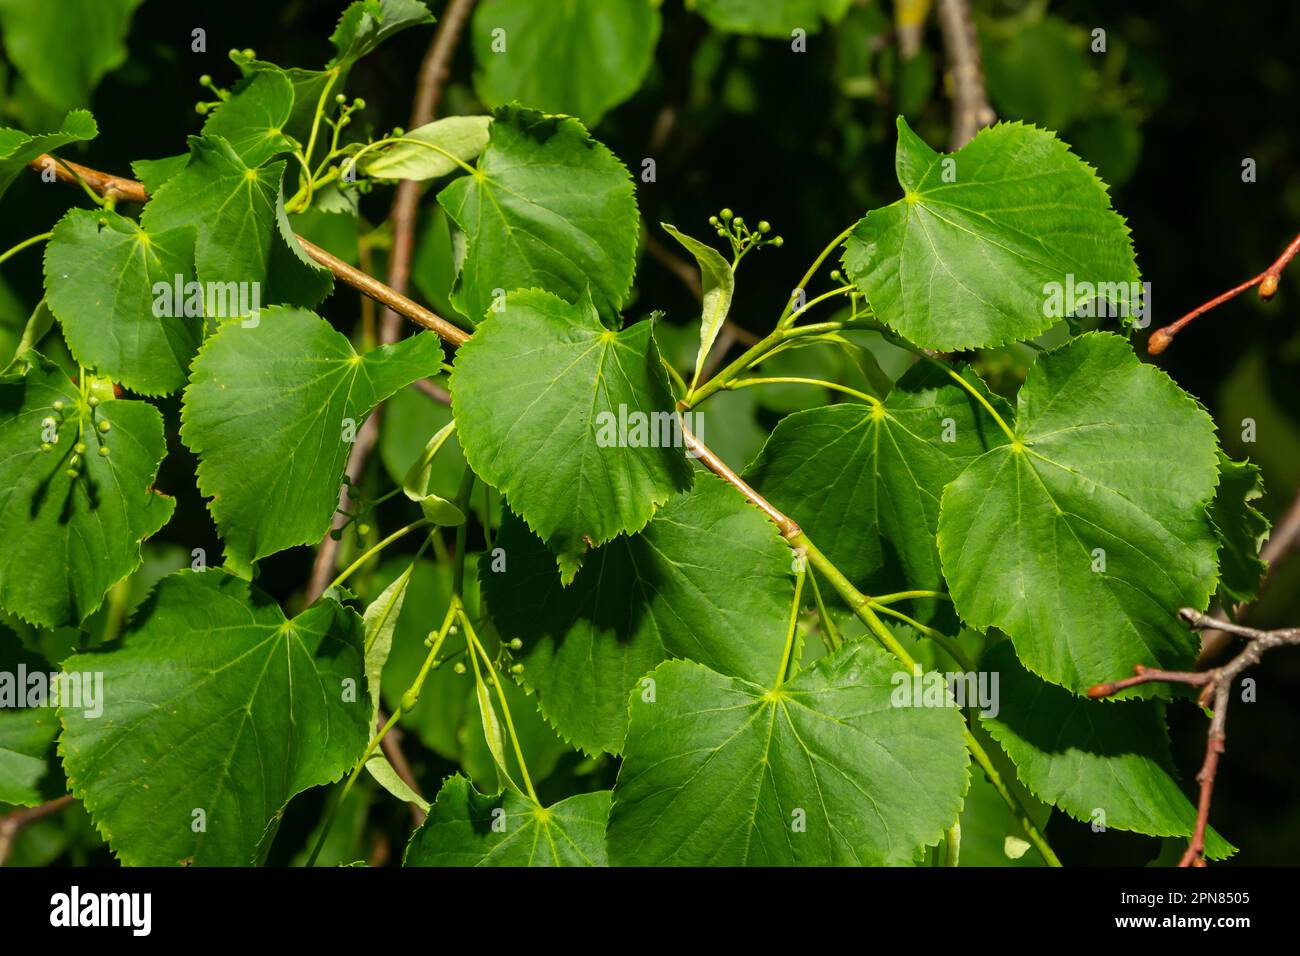 Linden branch with green leaves and buds before flowering. Stock Photo